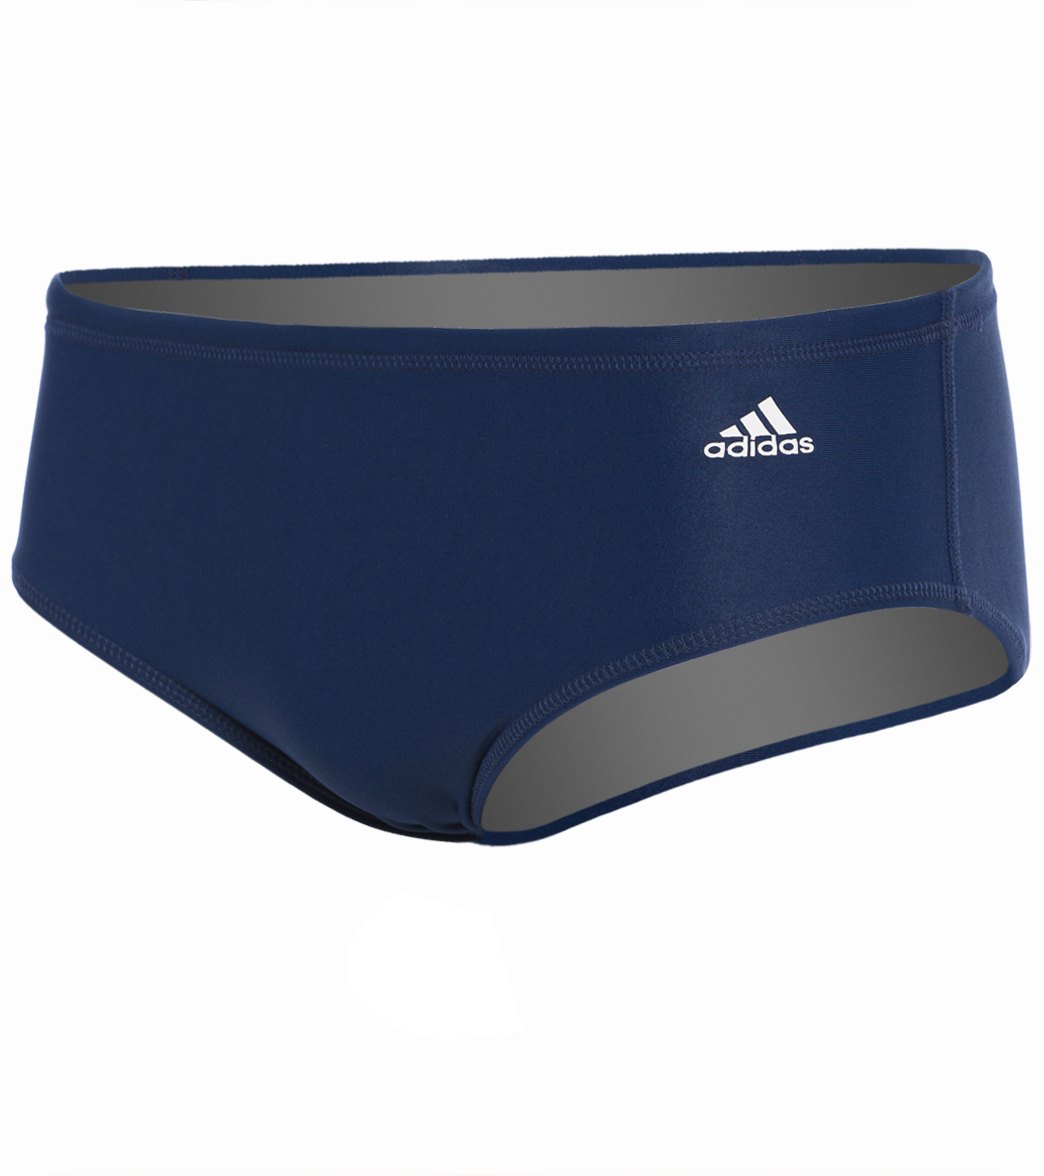 Adidas Men's Waterpolo Brief Swimsuit at SwimOutlet.com